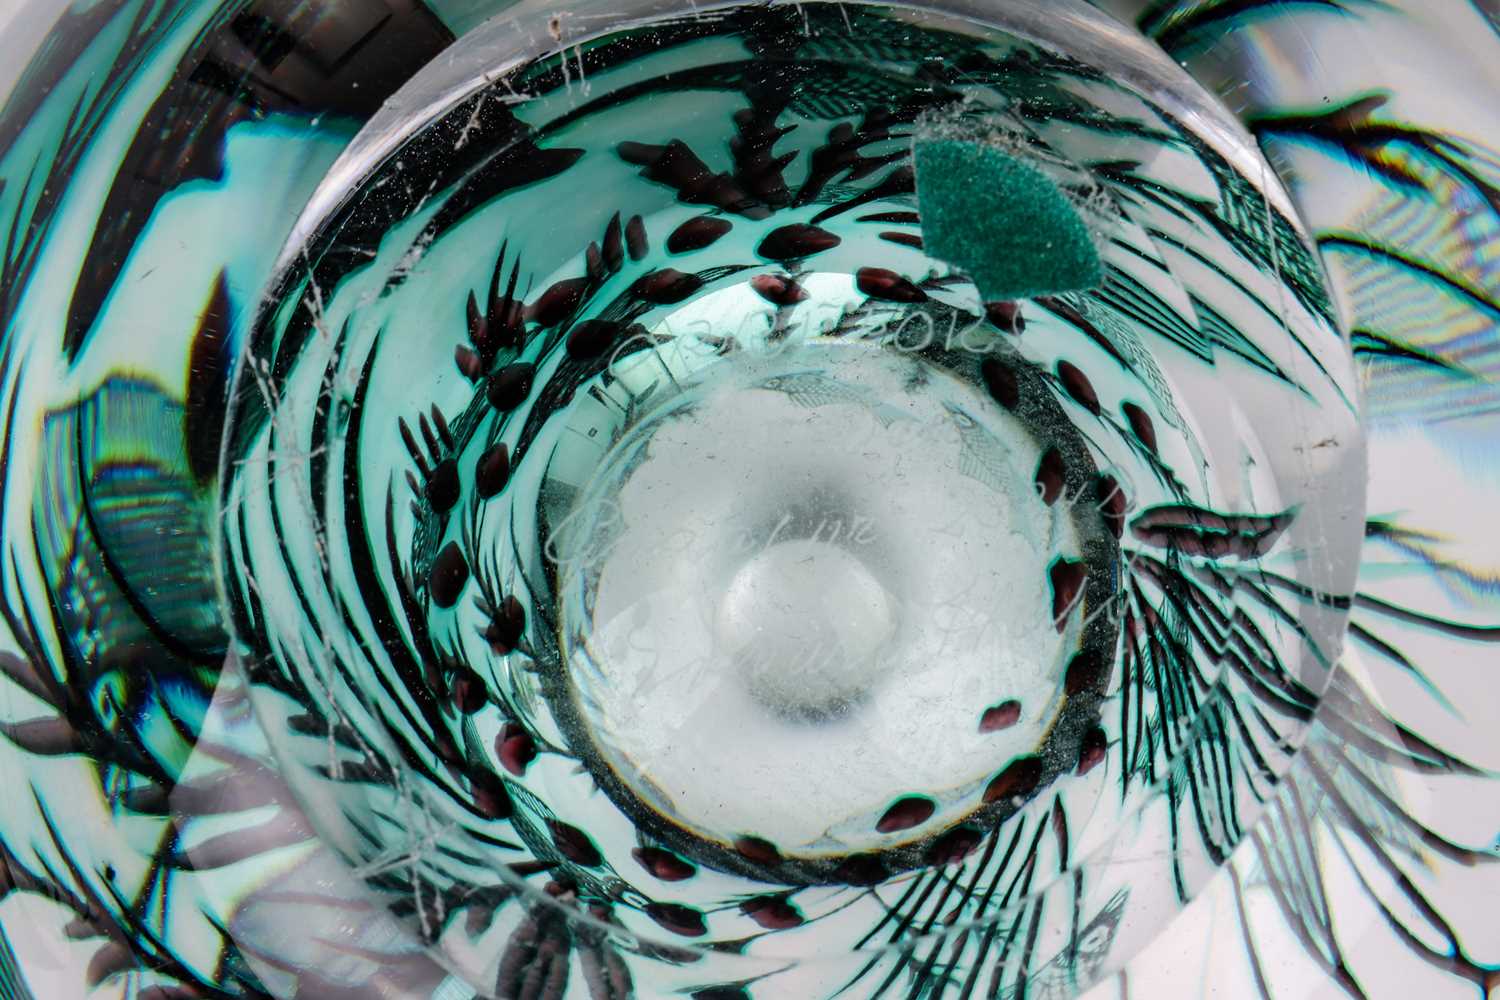 Edward Hald (1883-1980) for Orrefors, a Fiskgraal glass vase, with internal decoration of fish - Image 5 of 5